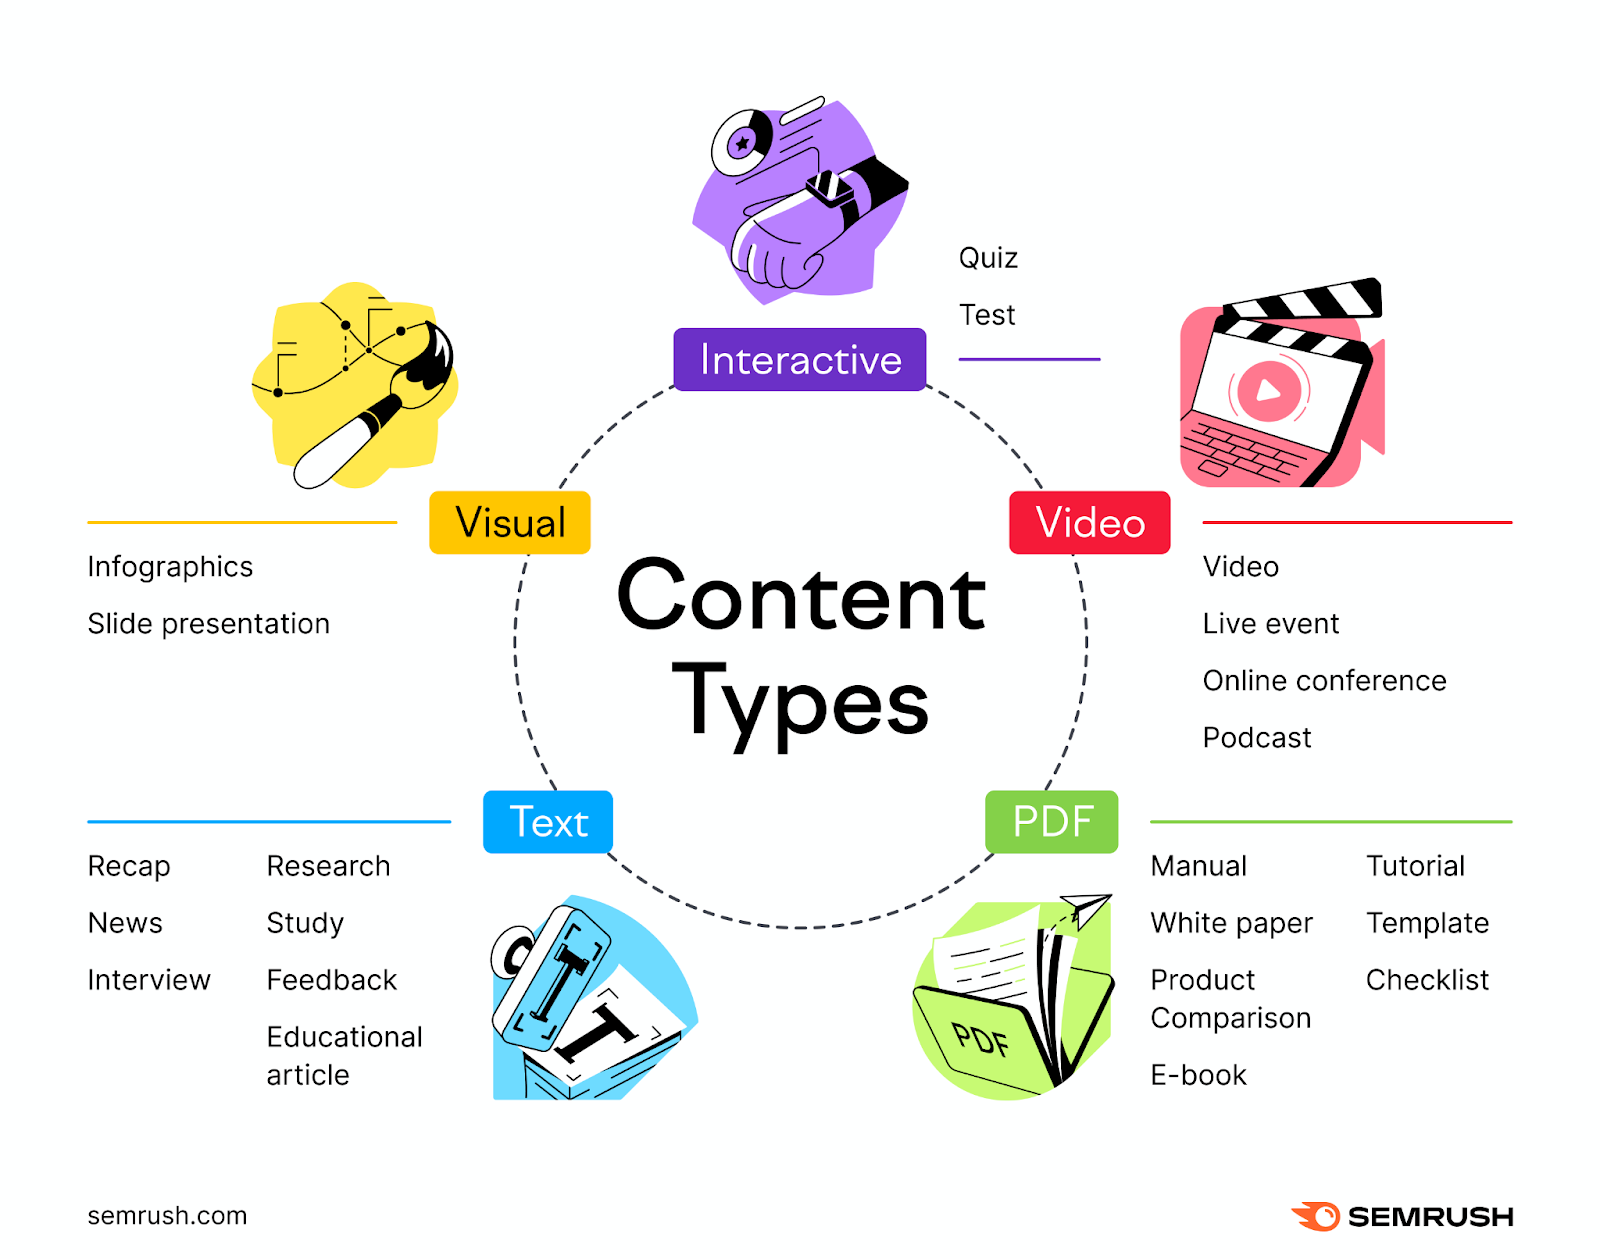 An infographic visualizing different content types